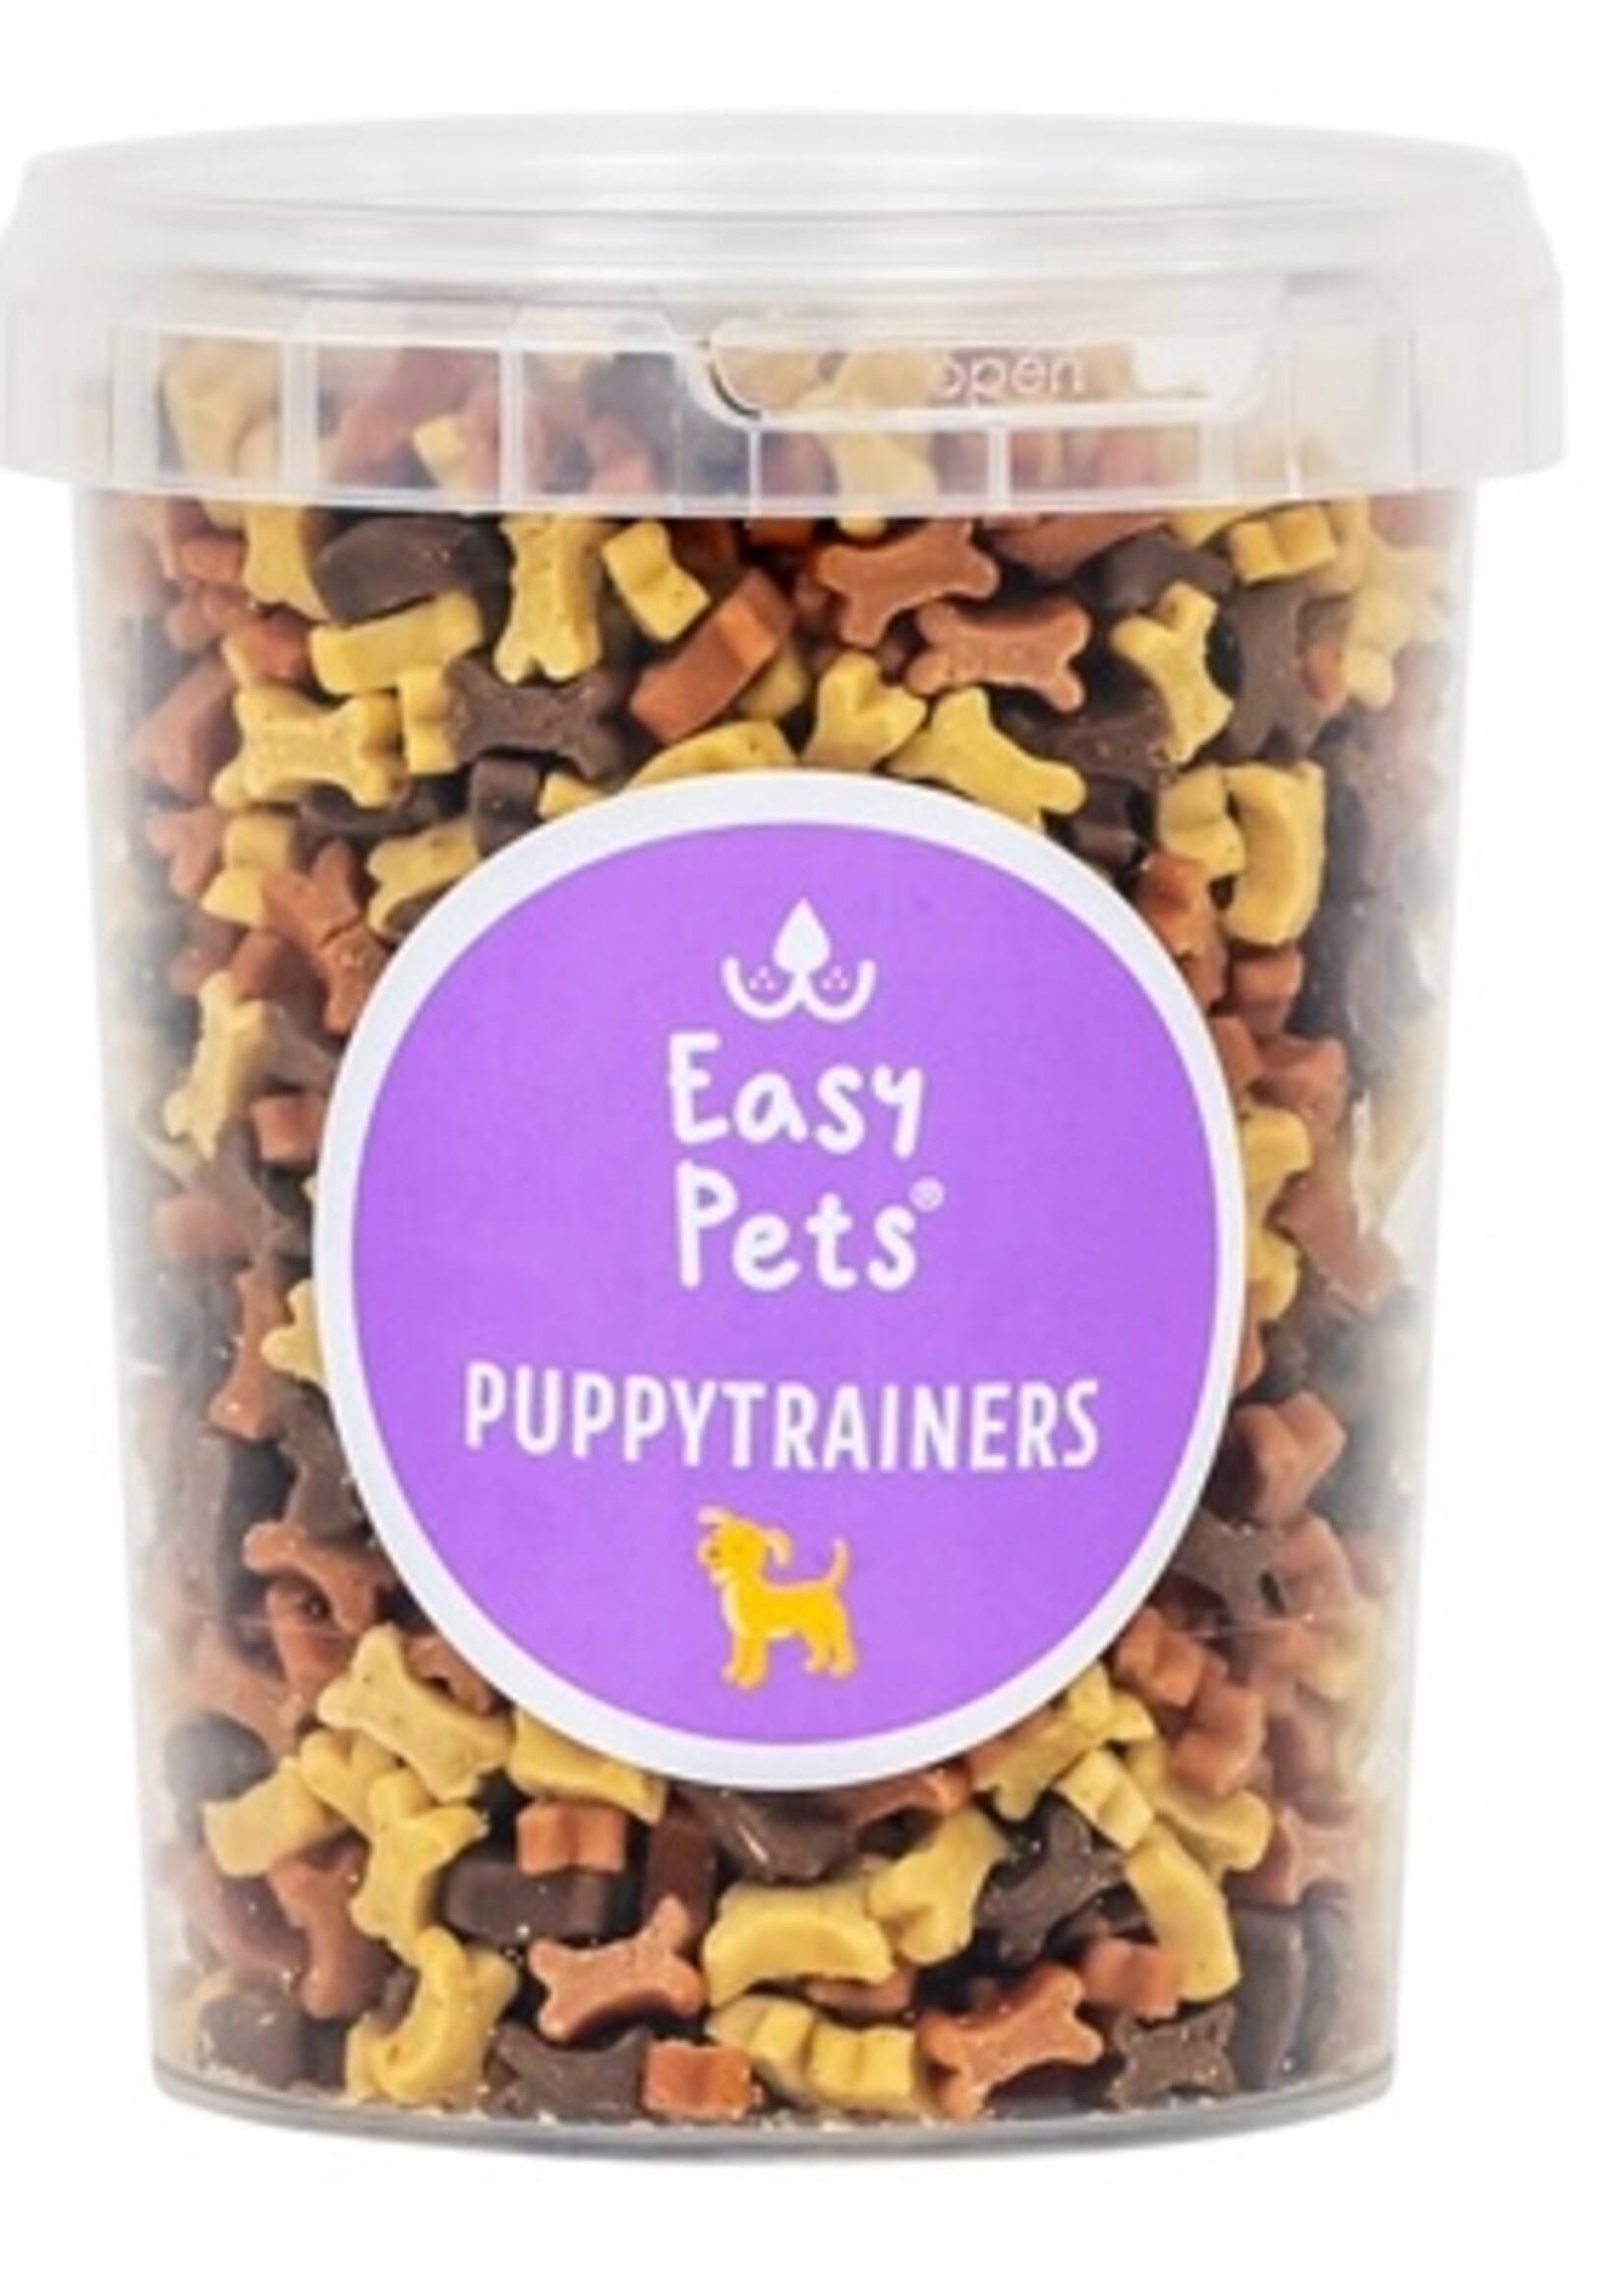 Easypets Easypets puppy trainers